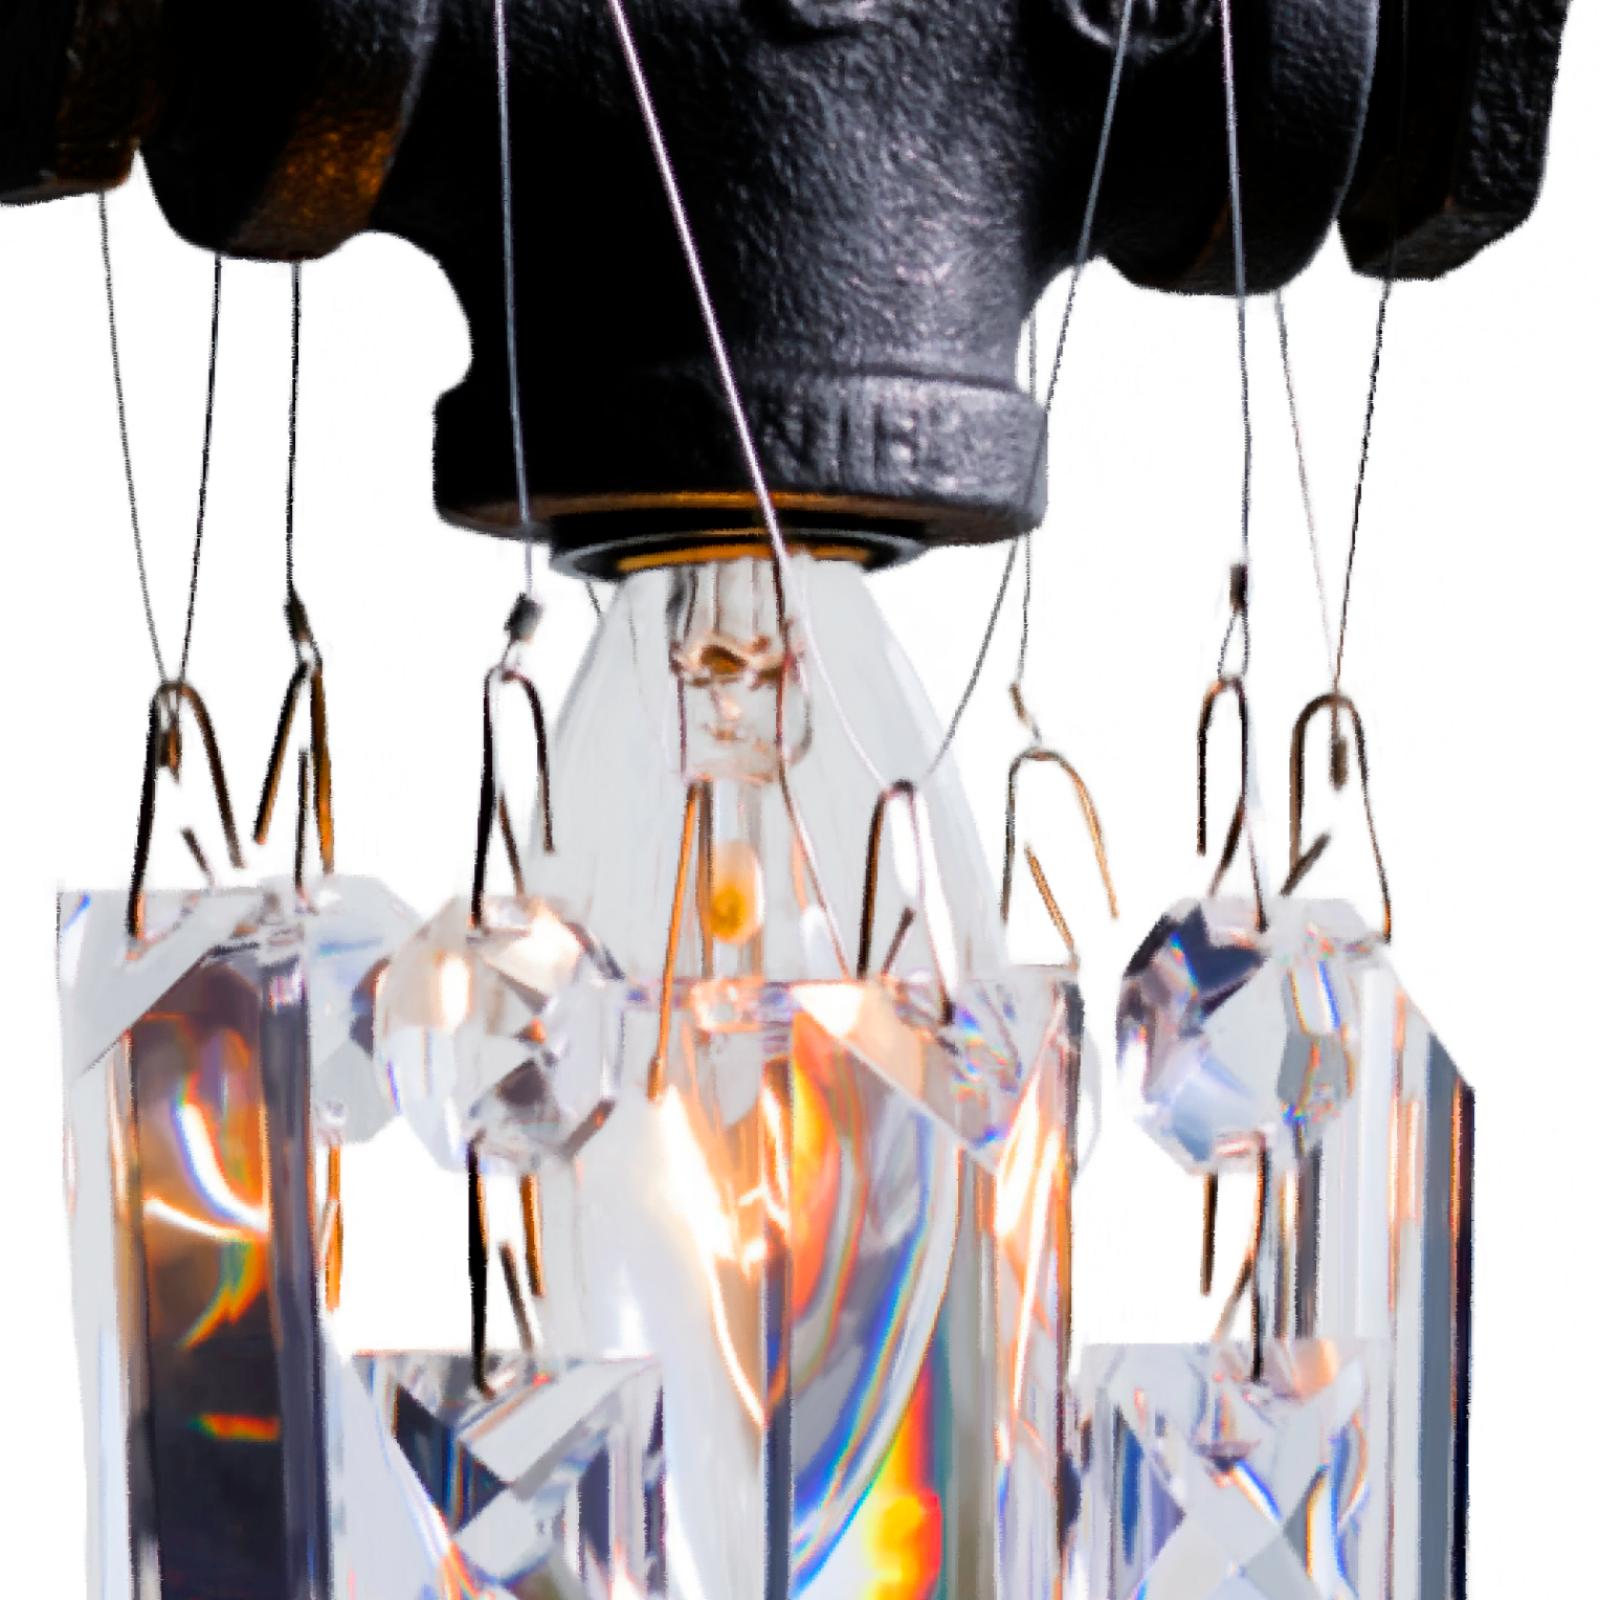 This single-bulb Tribeca chandelier pendant is a small jewel of an industrial-chic crystal pendant. Made from rough, masculine black steel gas fittings and high-quality gem-cut crystal, this little sparkler exudes urban sophistication and contrast.